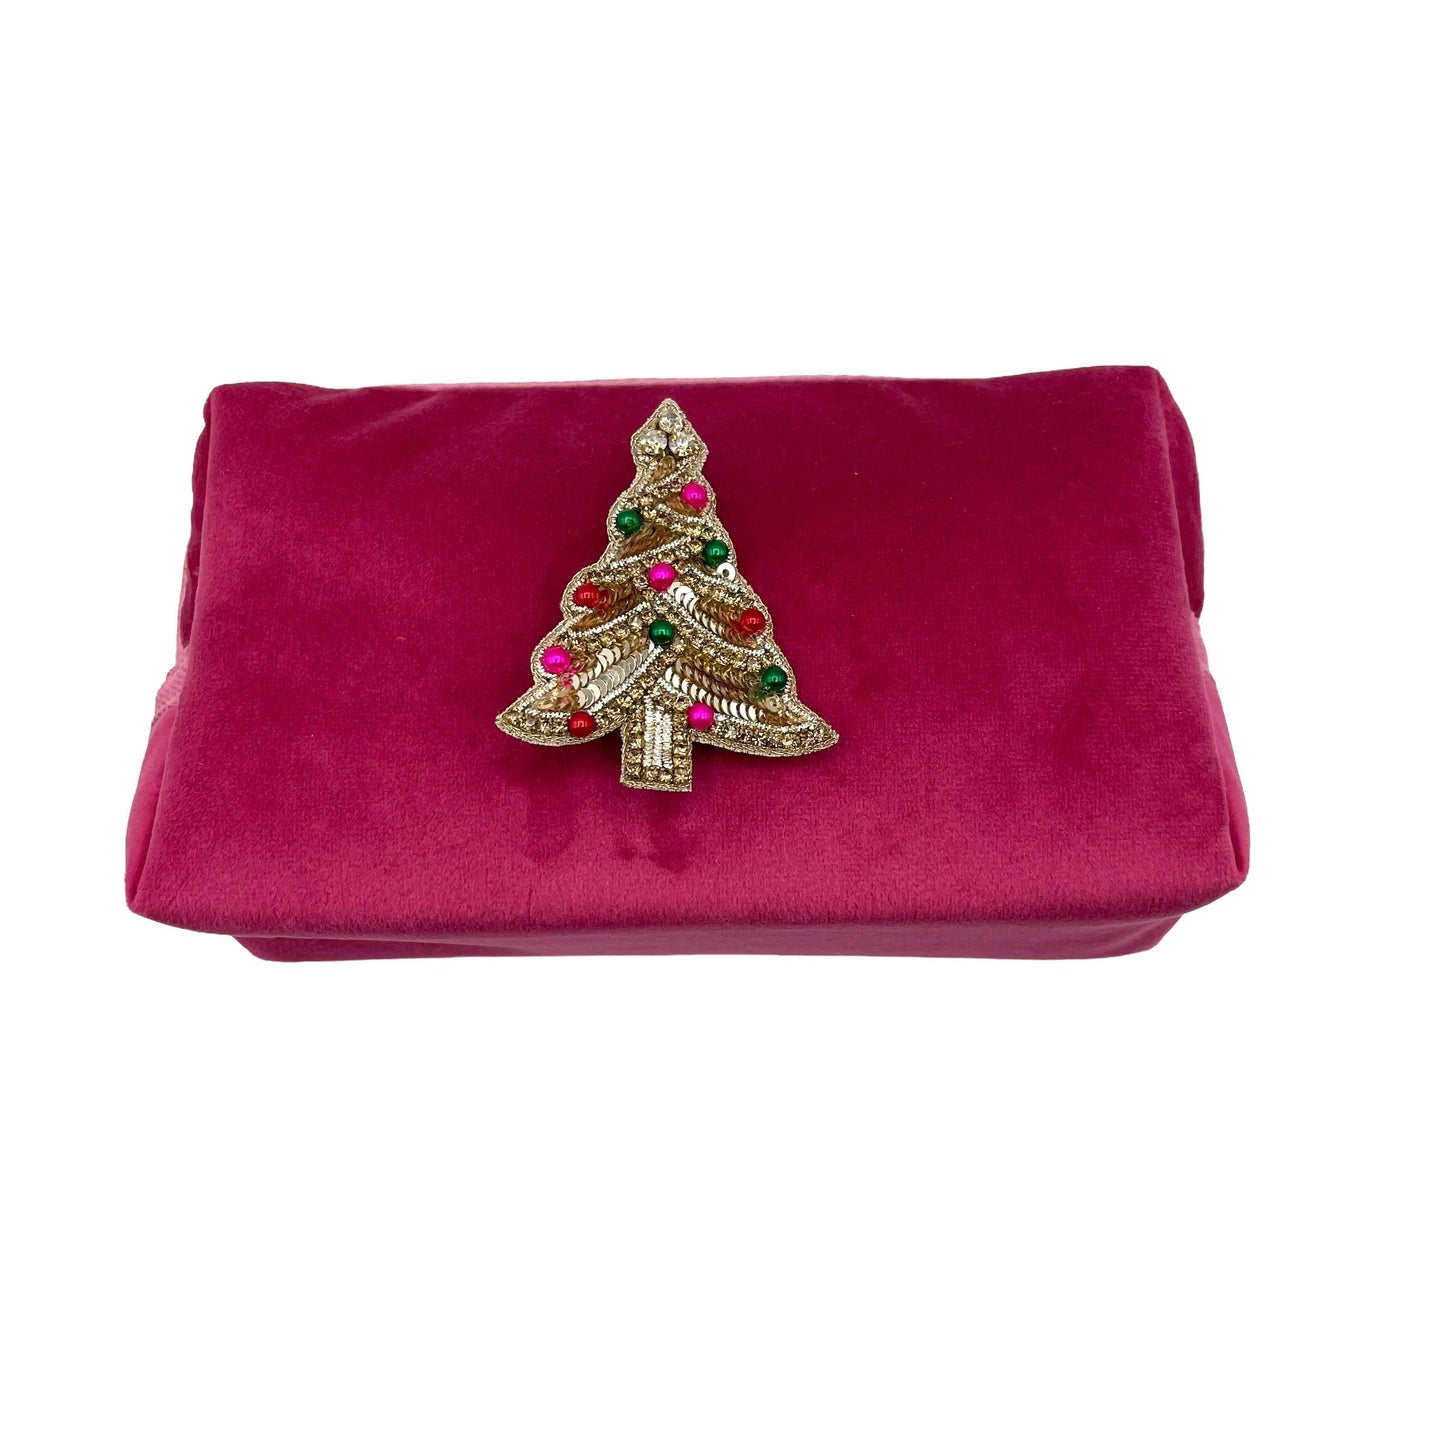 Bright pink make-up bag and a kitsch tree pin - recycled velvet